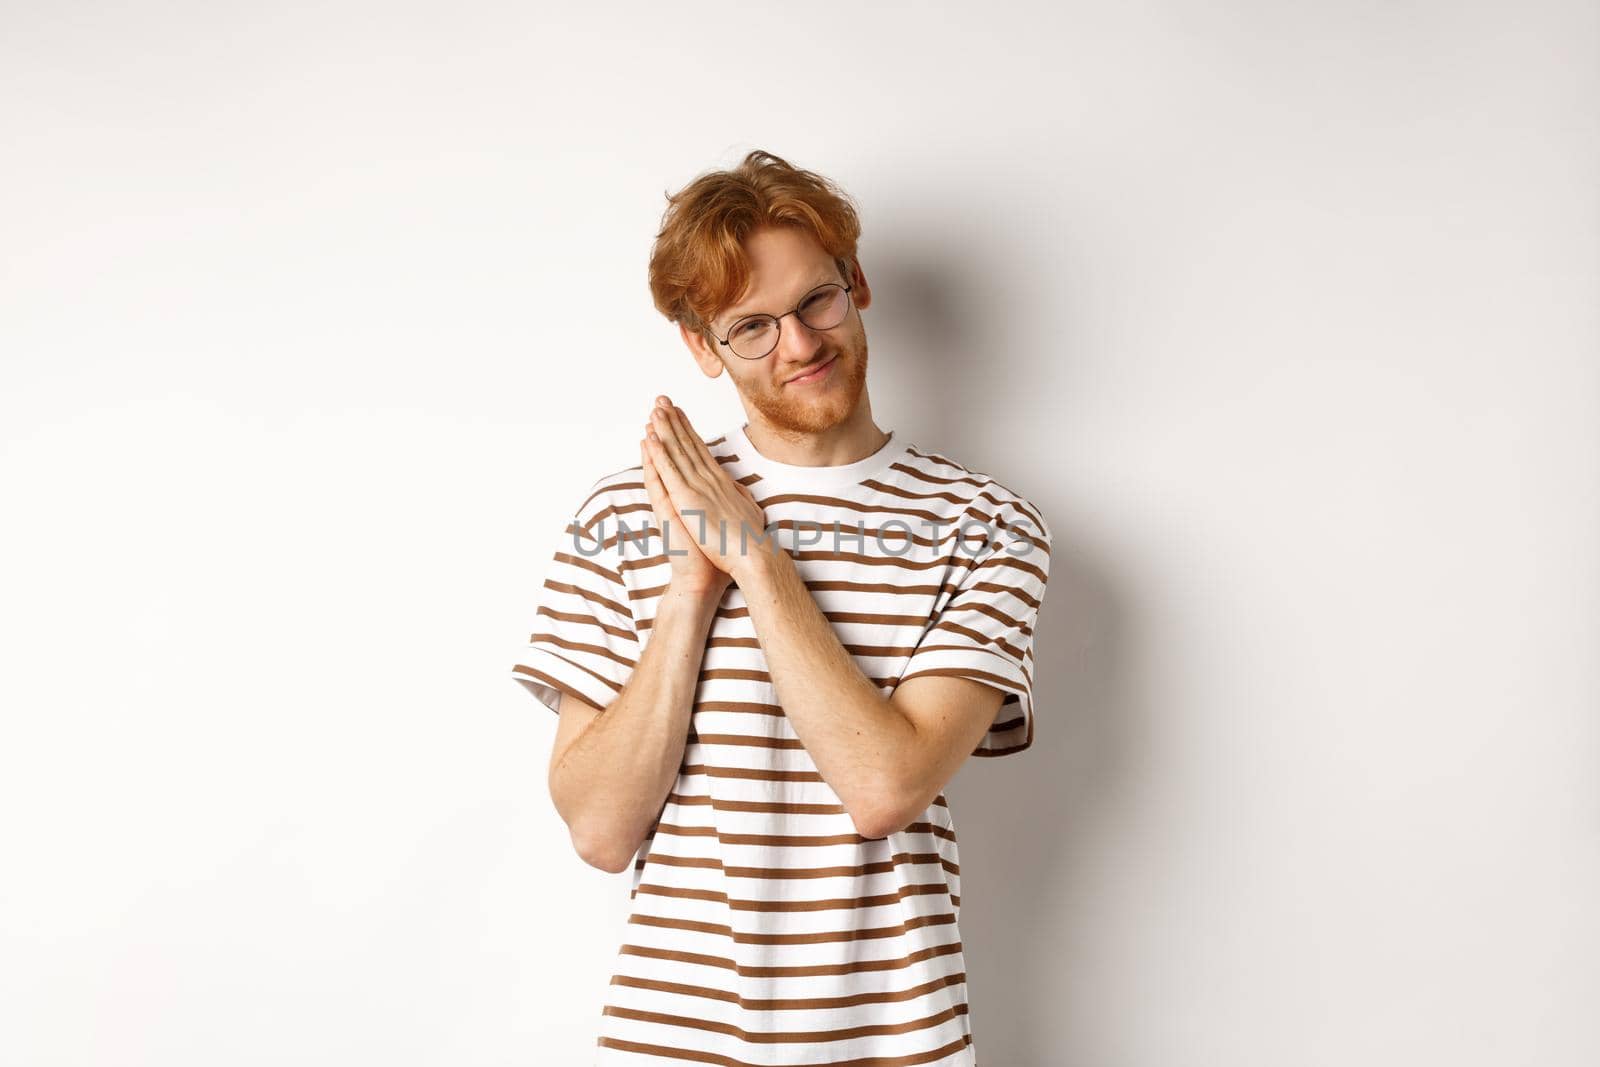 Cunning redhead man having plan, rubbing palms and looking devious at camera, smirk and squint sly, standing over white background.